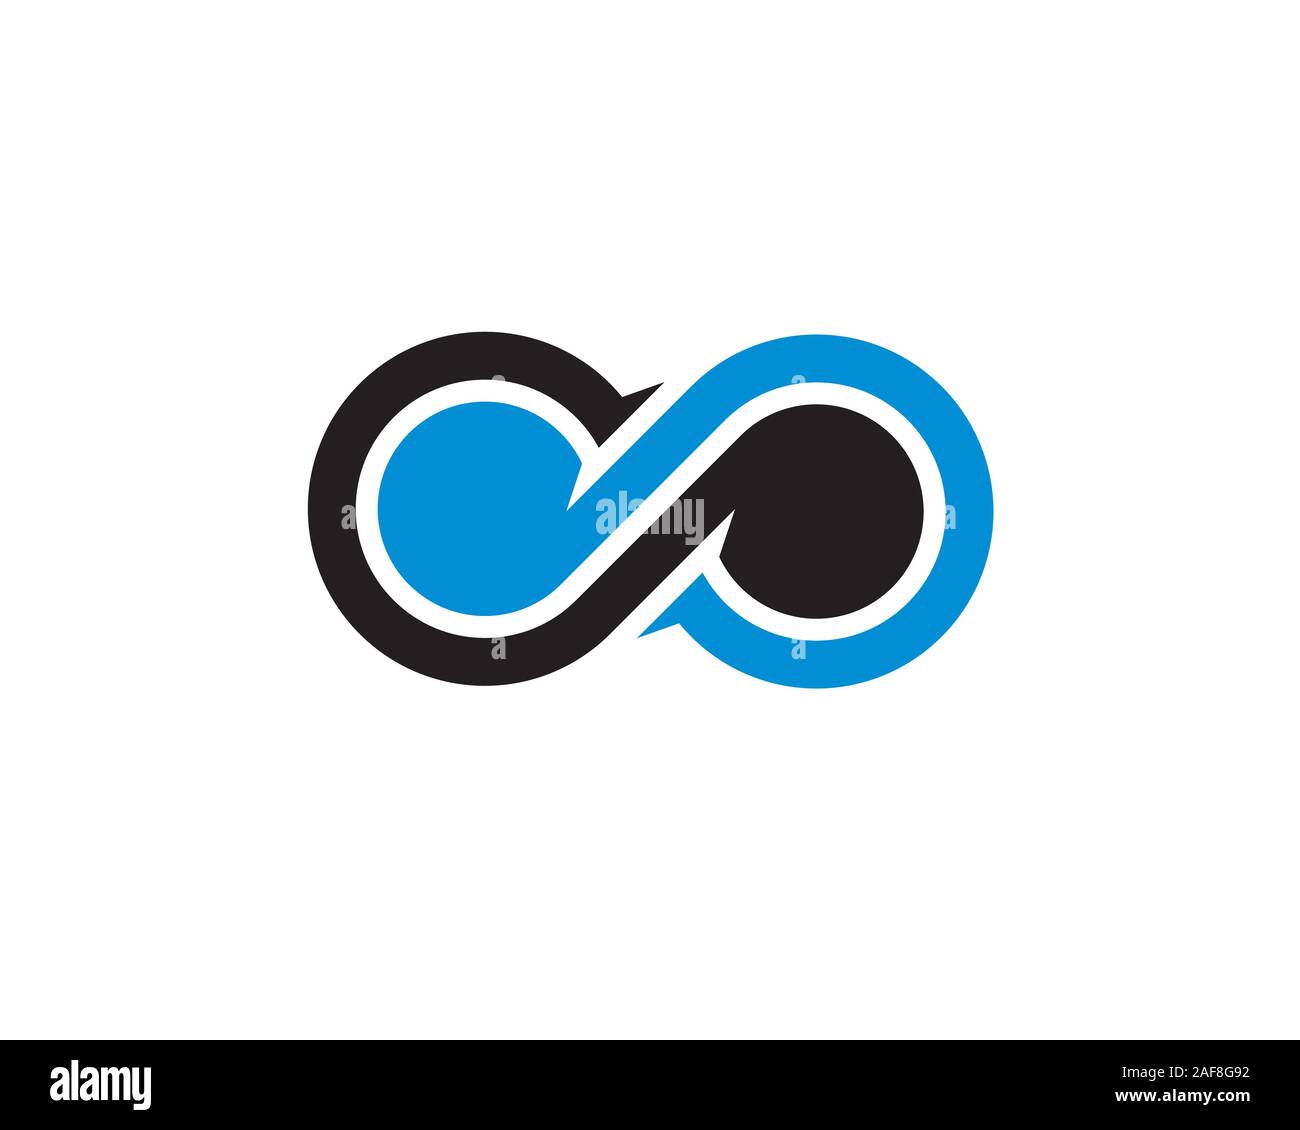 simple infinity symbol in modern and geometric style Stock Vector